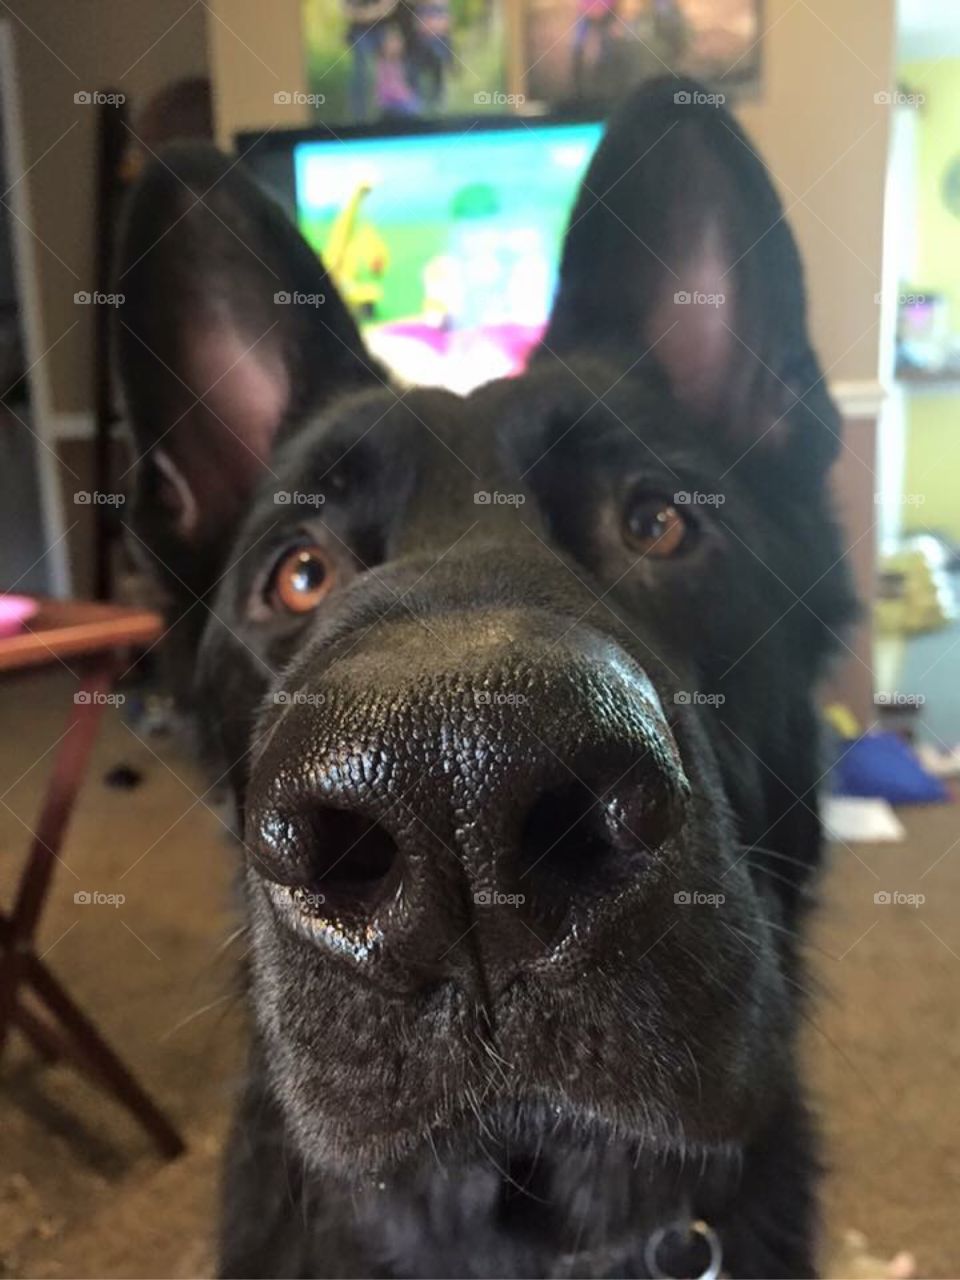 Did you say, "treat!??"